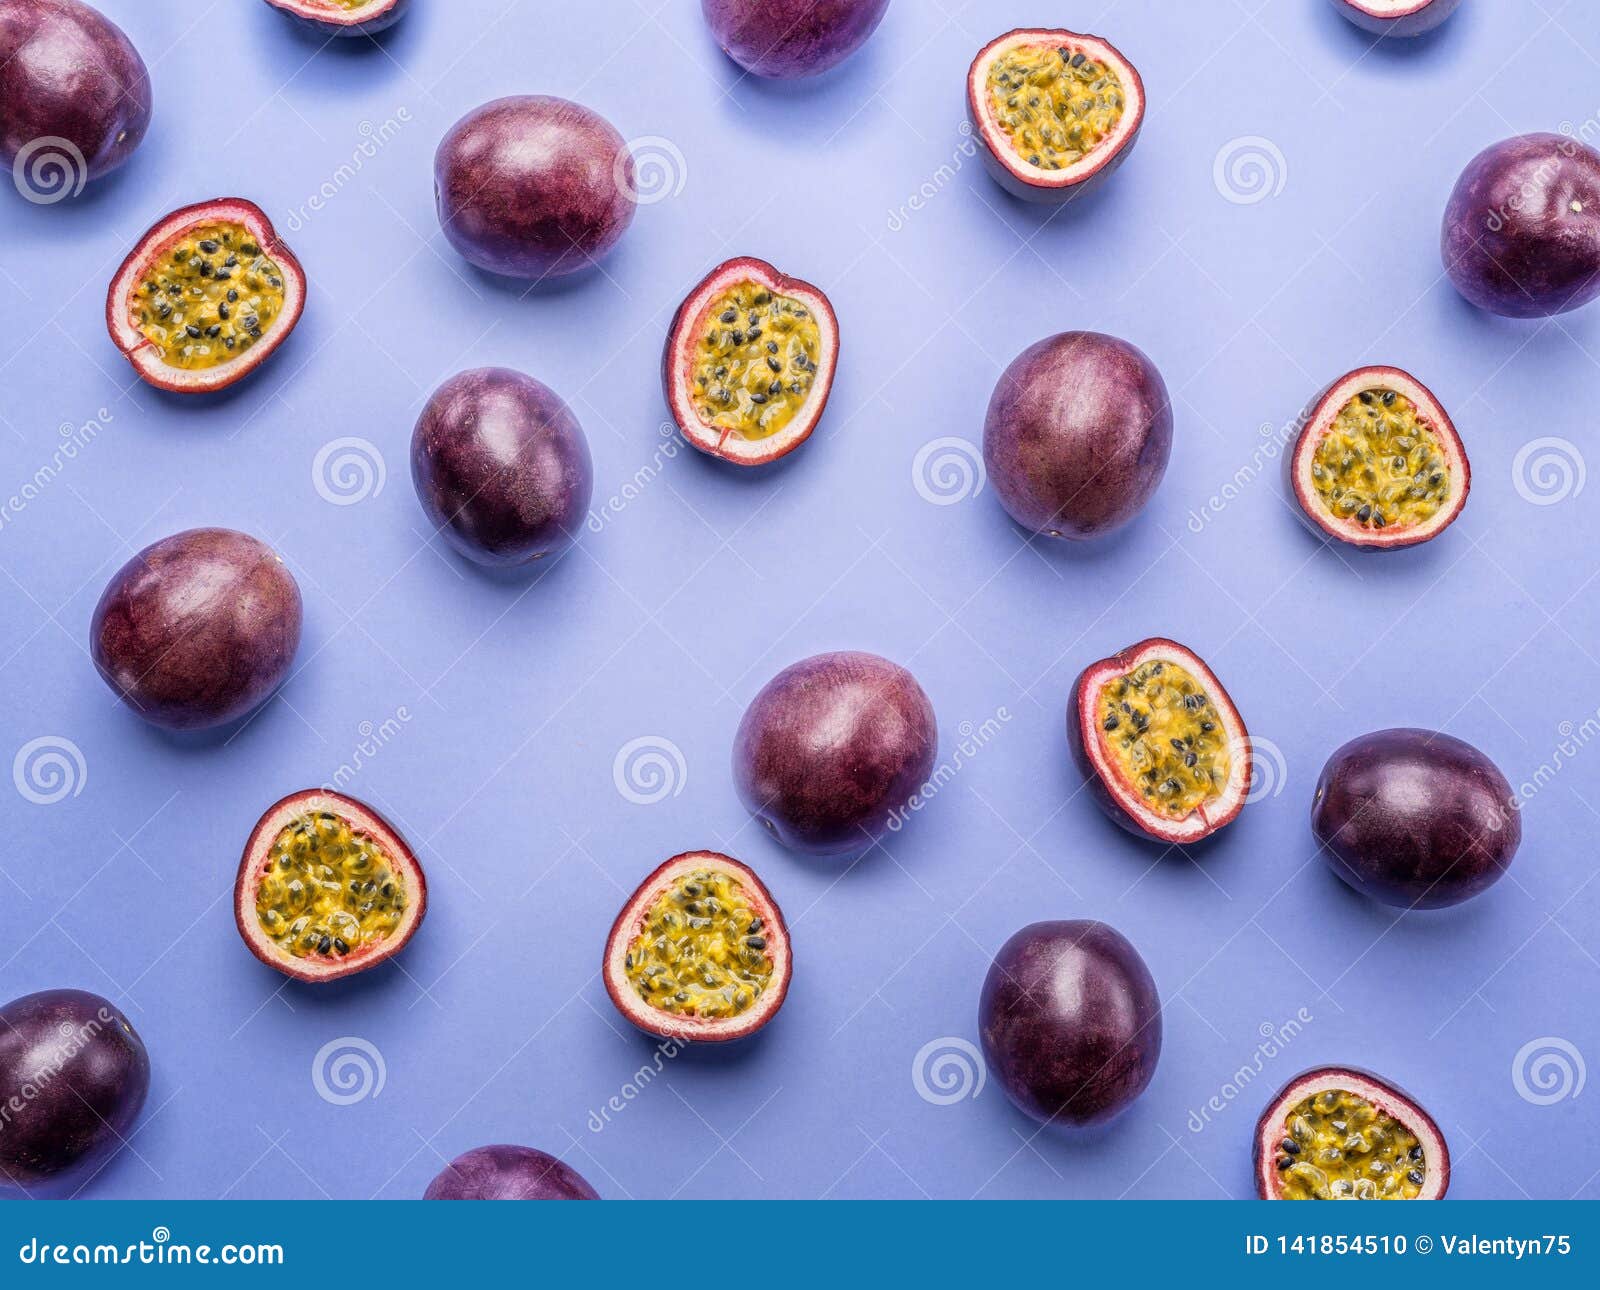 passion fruit background. set of passion fruits. top view